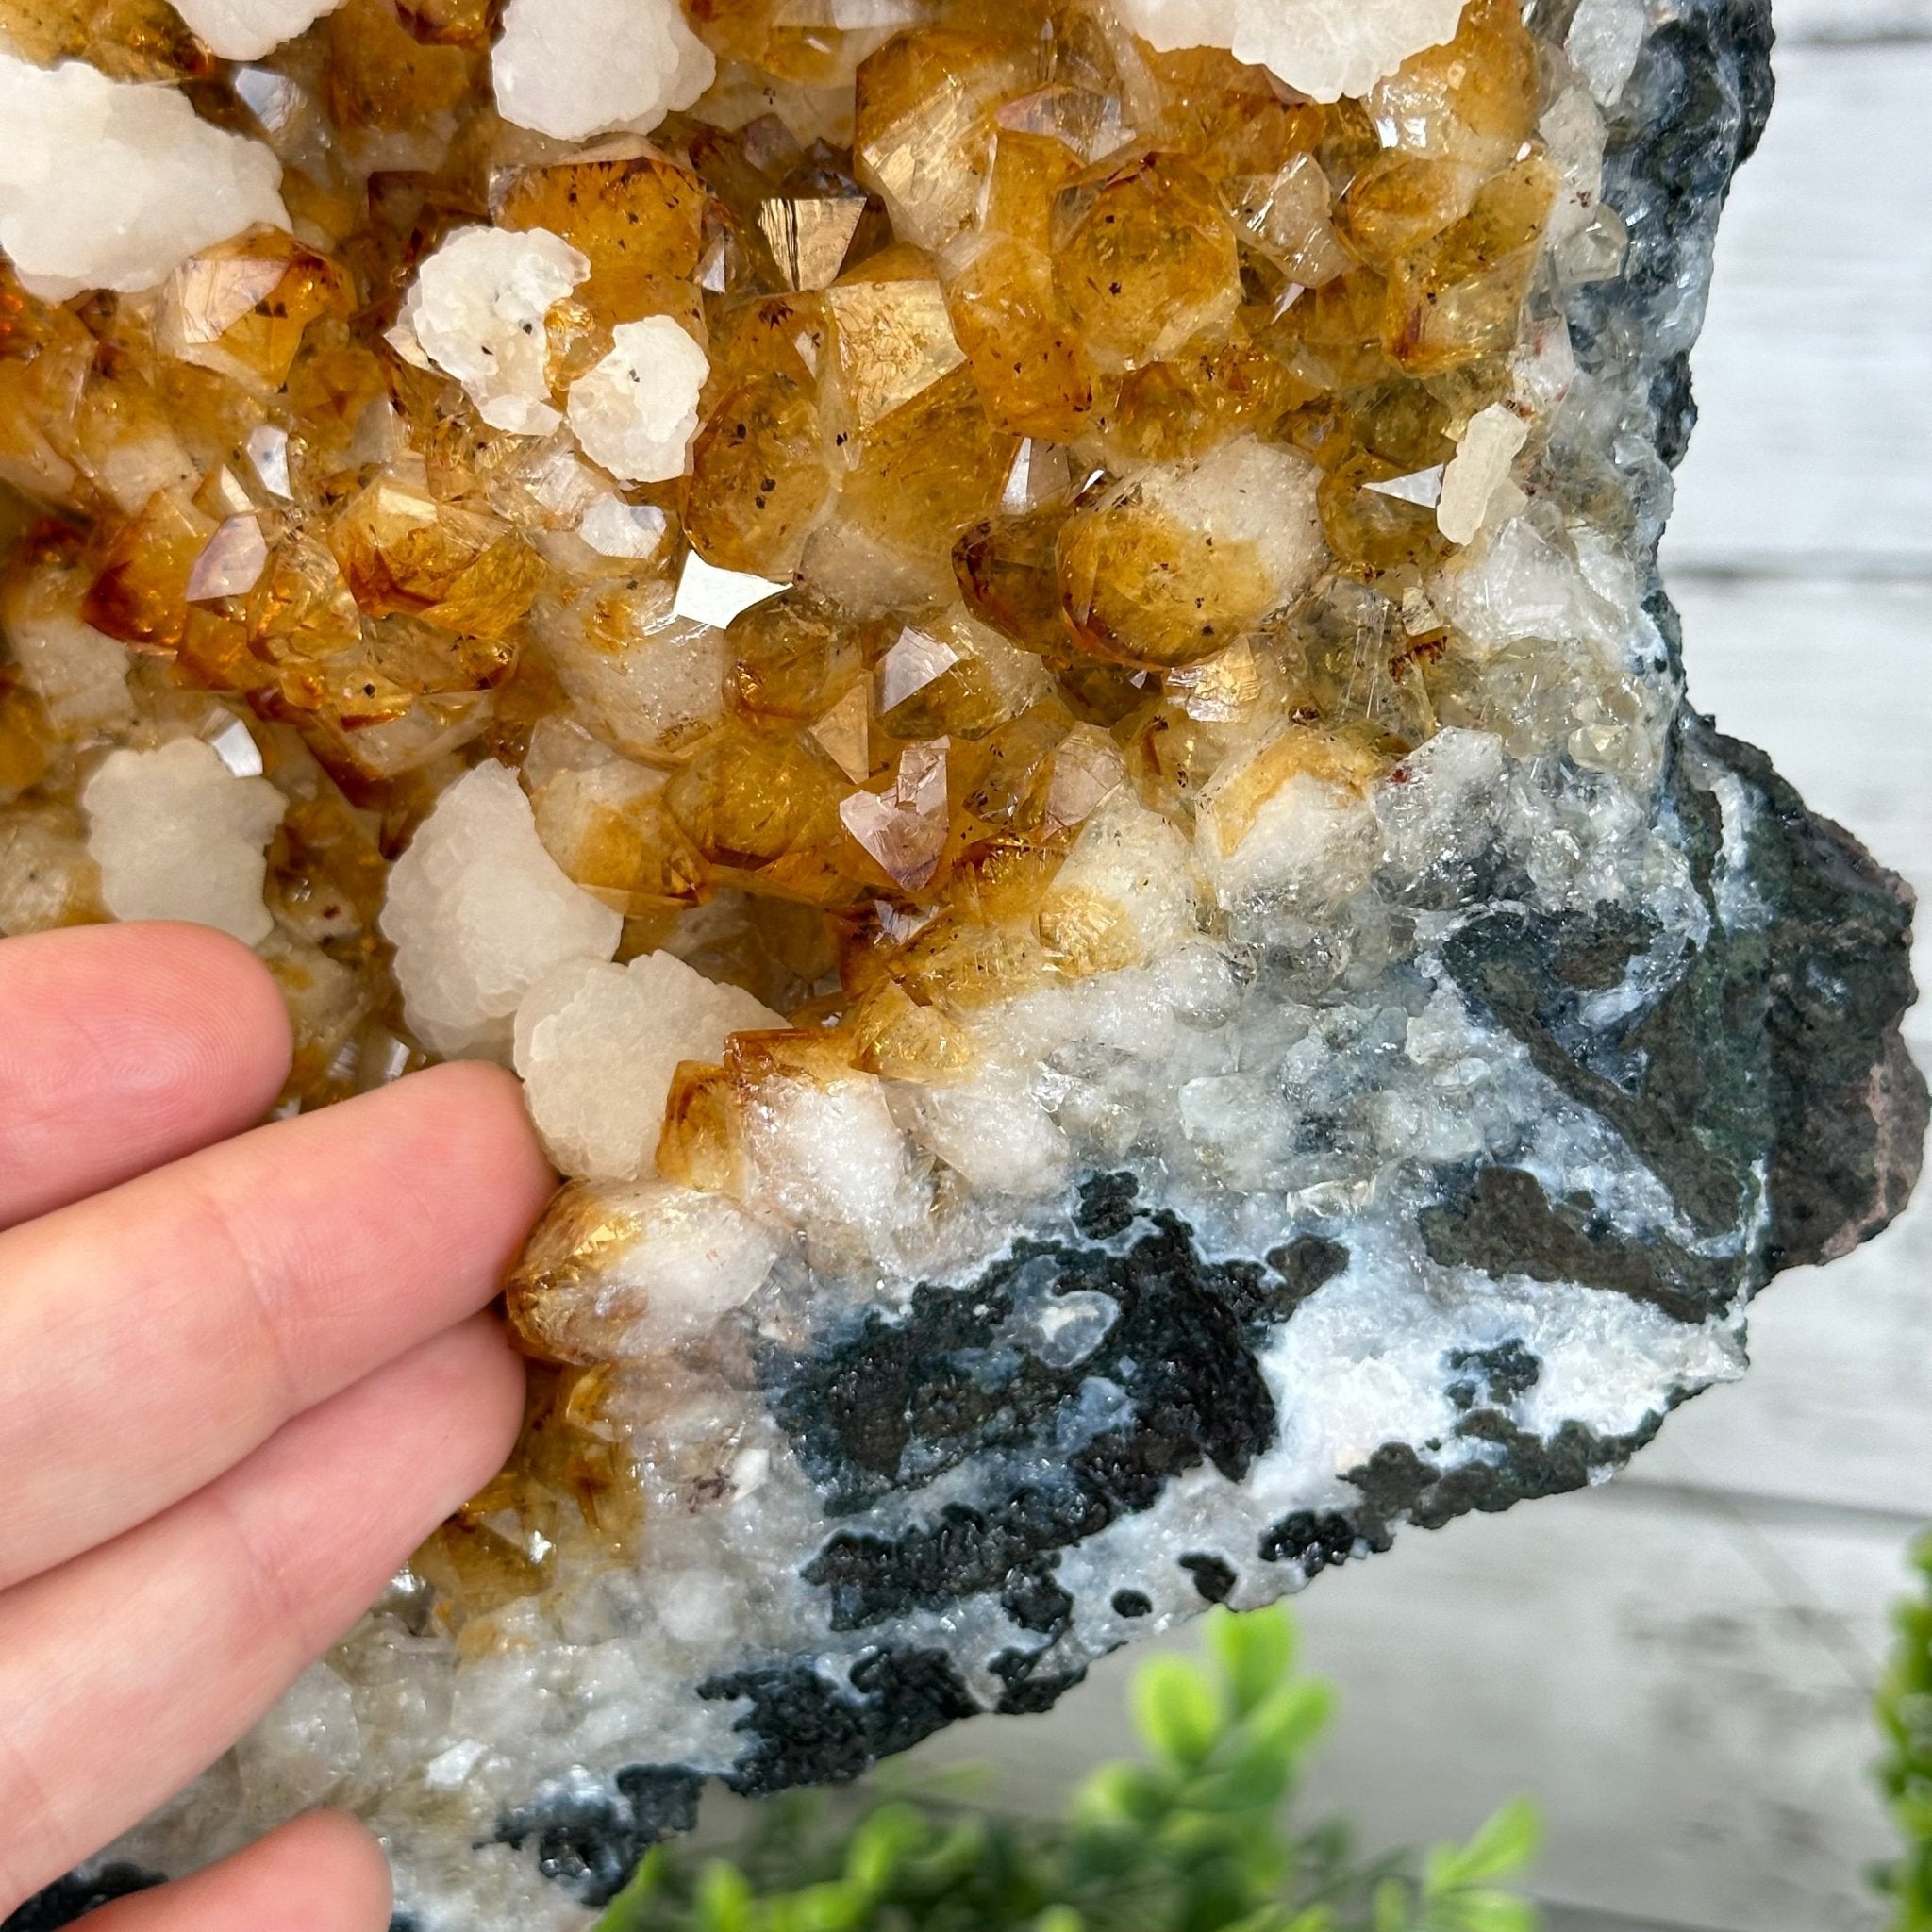 Citrine Crystal Cluster by Brazil Gems®, Metal Stand, 16.8 lbs & 15.1" Tall #5496-0054 - Brazil GemsBrazil GemsCitrine Crystal Cluster by Brazil Gems®, Metal Stand, 16.8 lbs & 15.1" Tall #5496-0054Clusters on Fixed Bases5496-0054